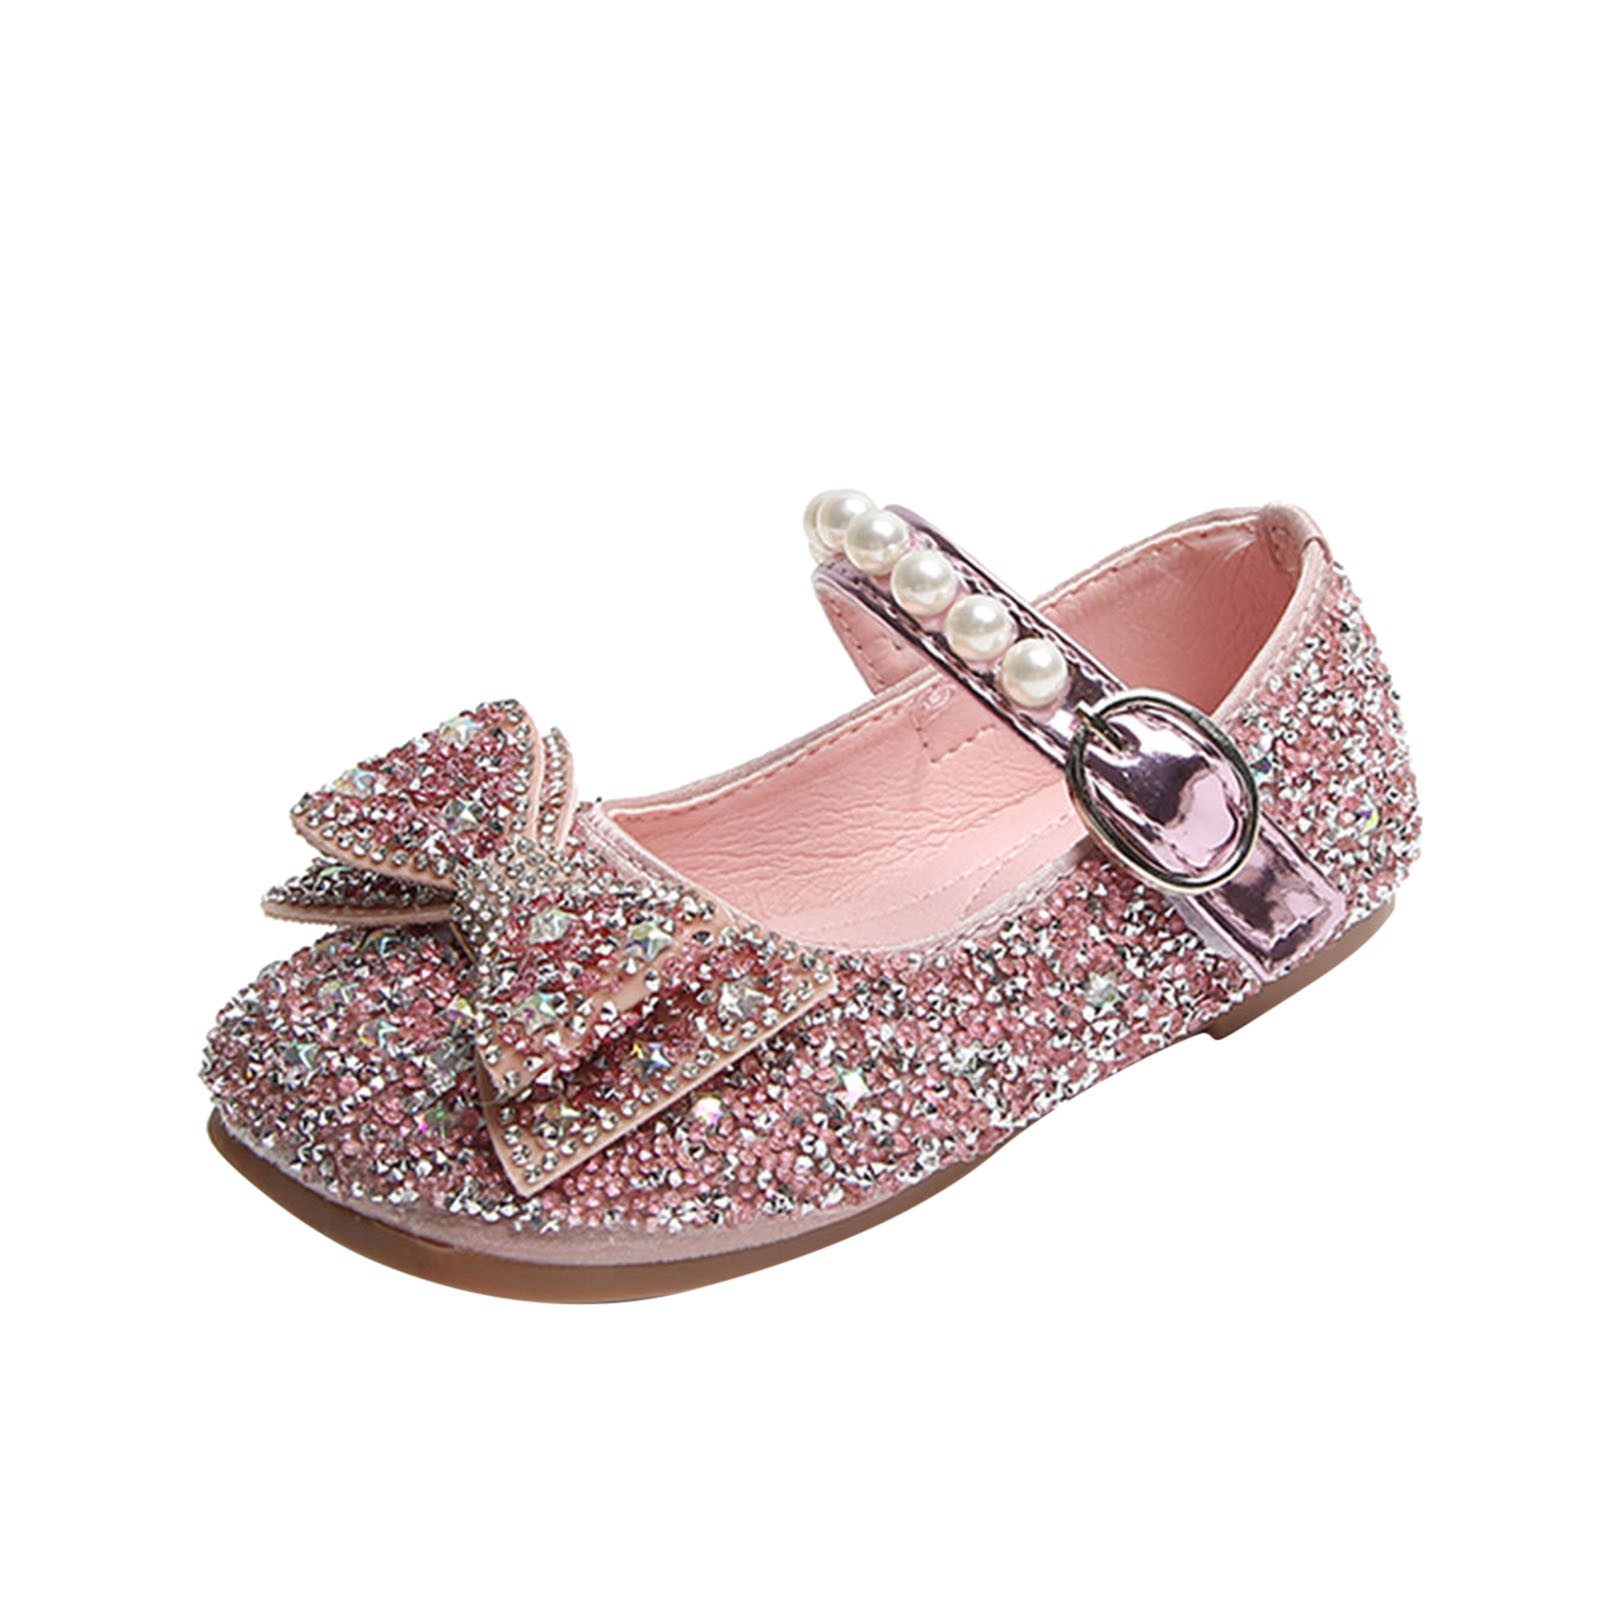 JDEFEG Girl Boots Size 10 Fashion Autumn Girls Casual Shoes Rhinestone Sequin Bow Buckle Dress Shoes Dance Shoes Girls Rain Shoes Pu Pink 27 - image 1 of 5